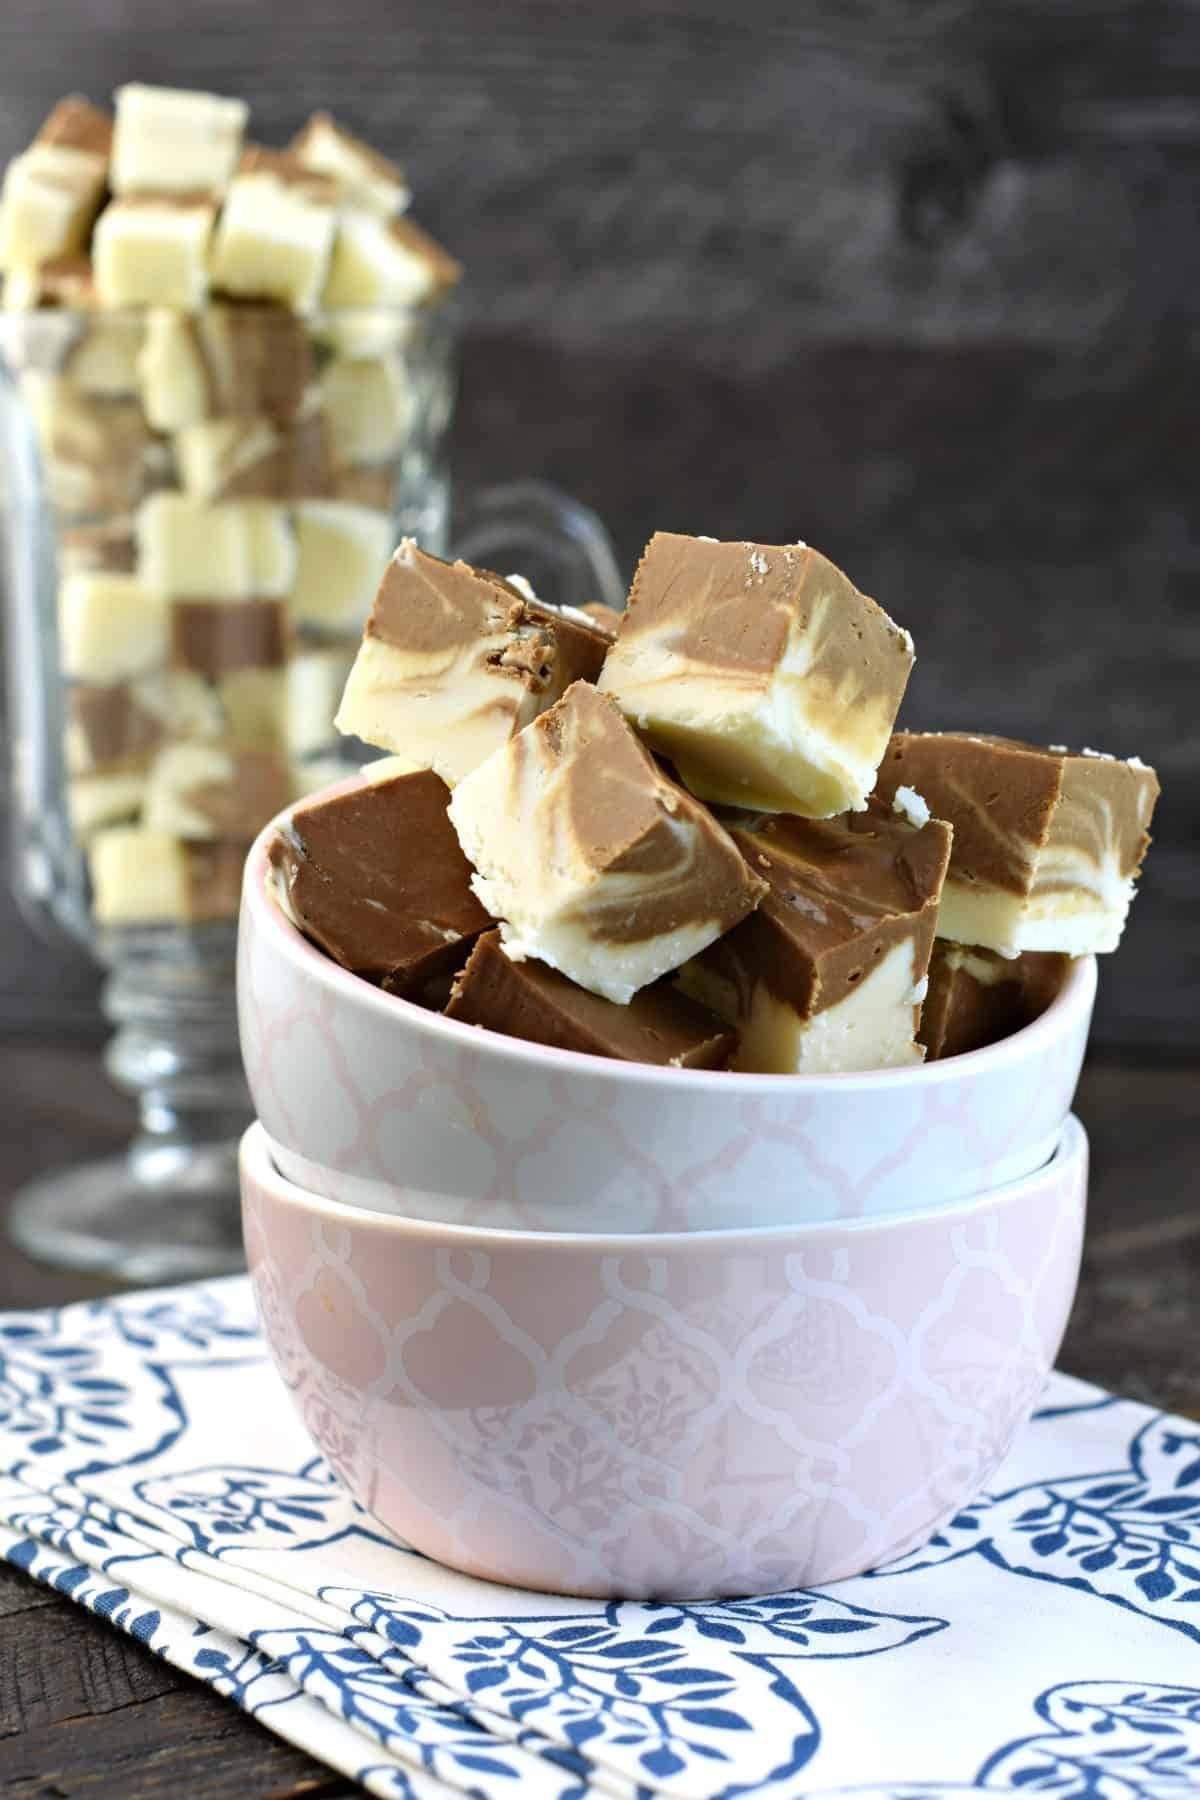 Bunch of fudge in a bowl made with With white chocolate and marshmallow cream.